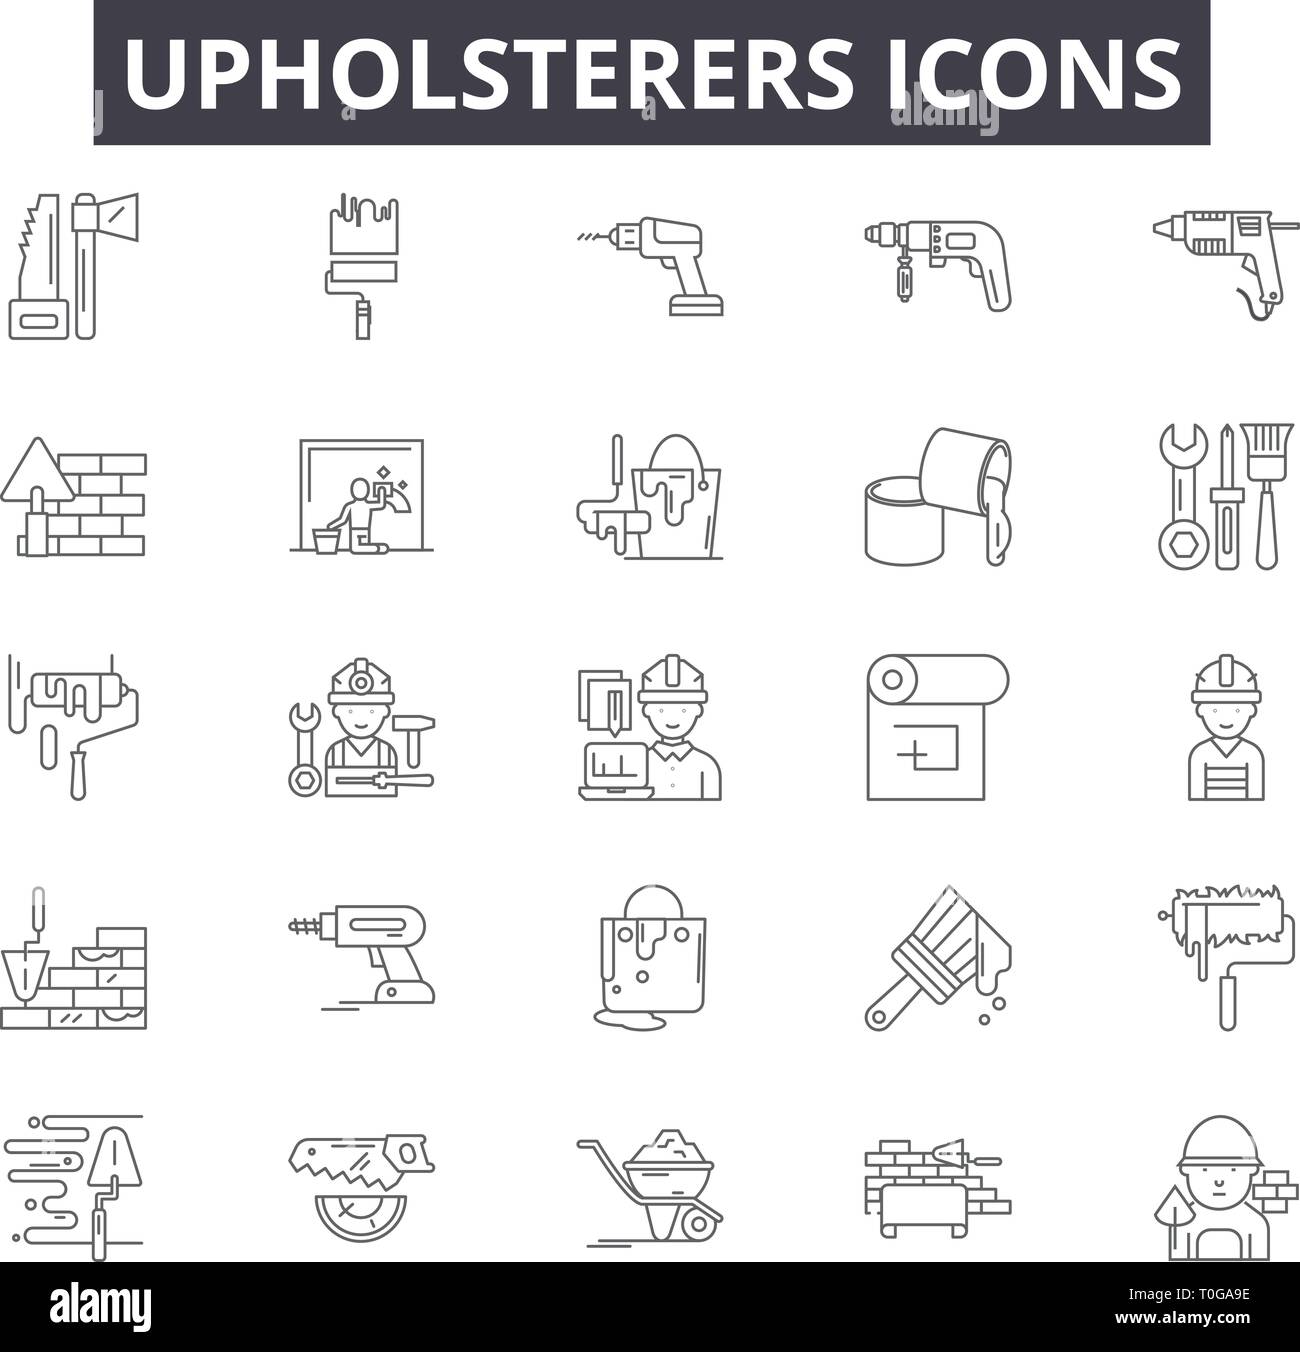 Upholsterers line icons for web and mobile design. Editable stroke signs. Upholsterers  outline concept illustrations Stock Vector